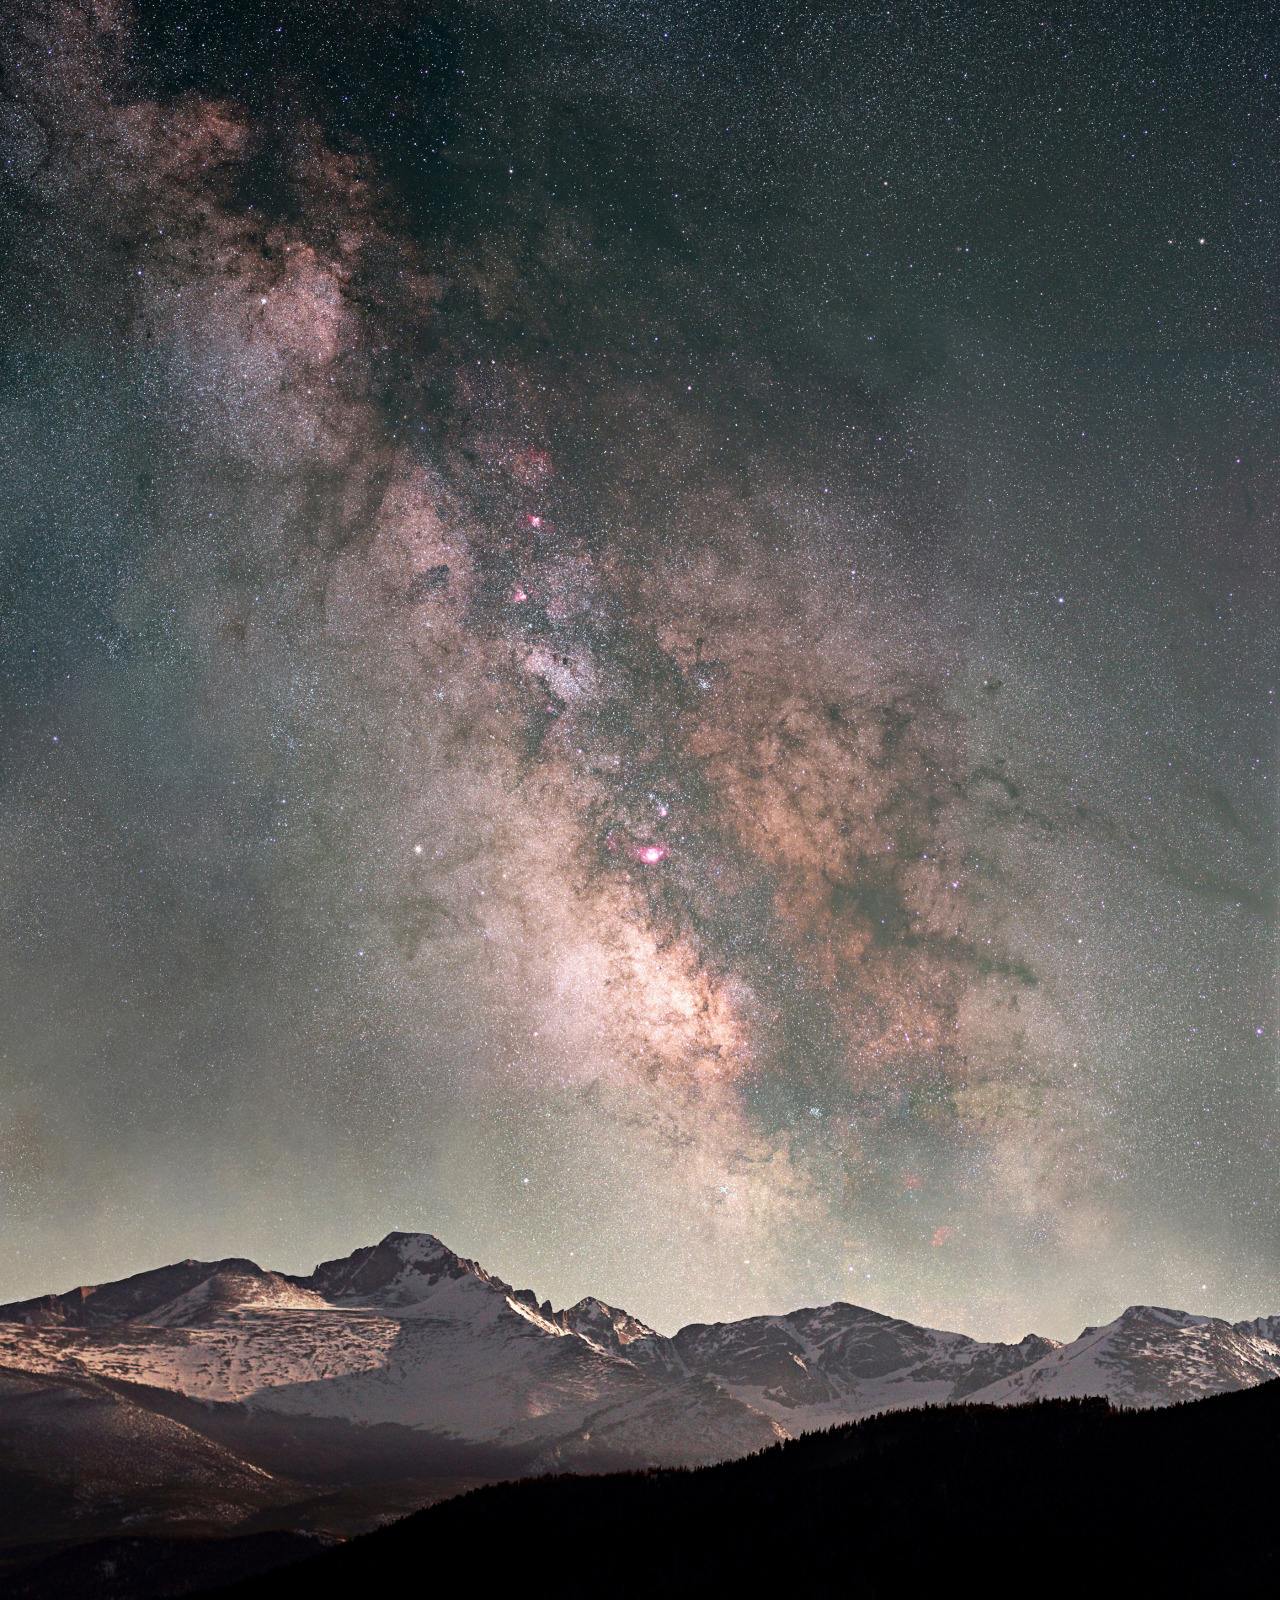 Night sky view of the Milky Way rising above the snow-capped peaks of Rocky Mountain National Park, Colorado.